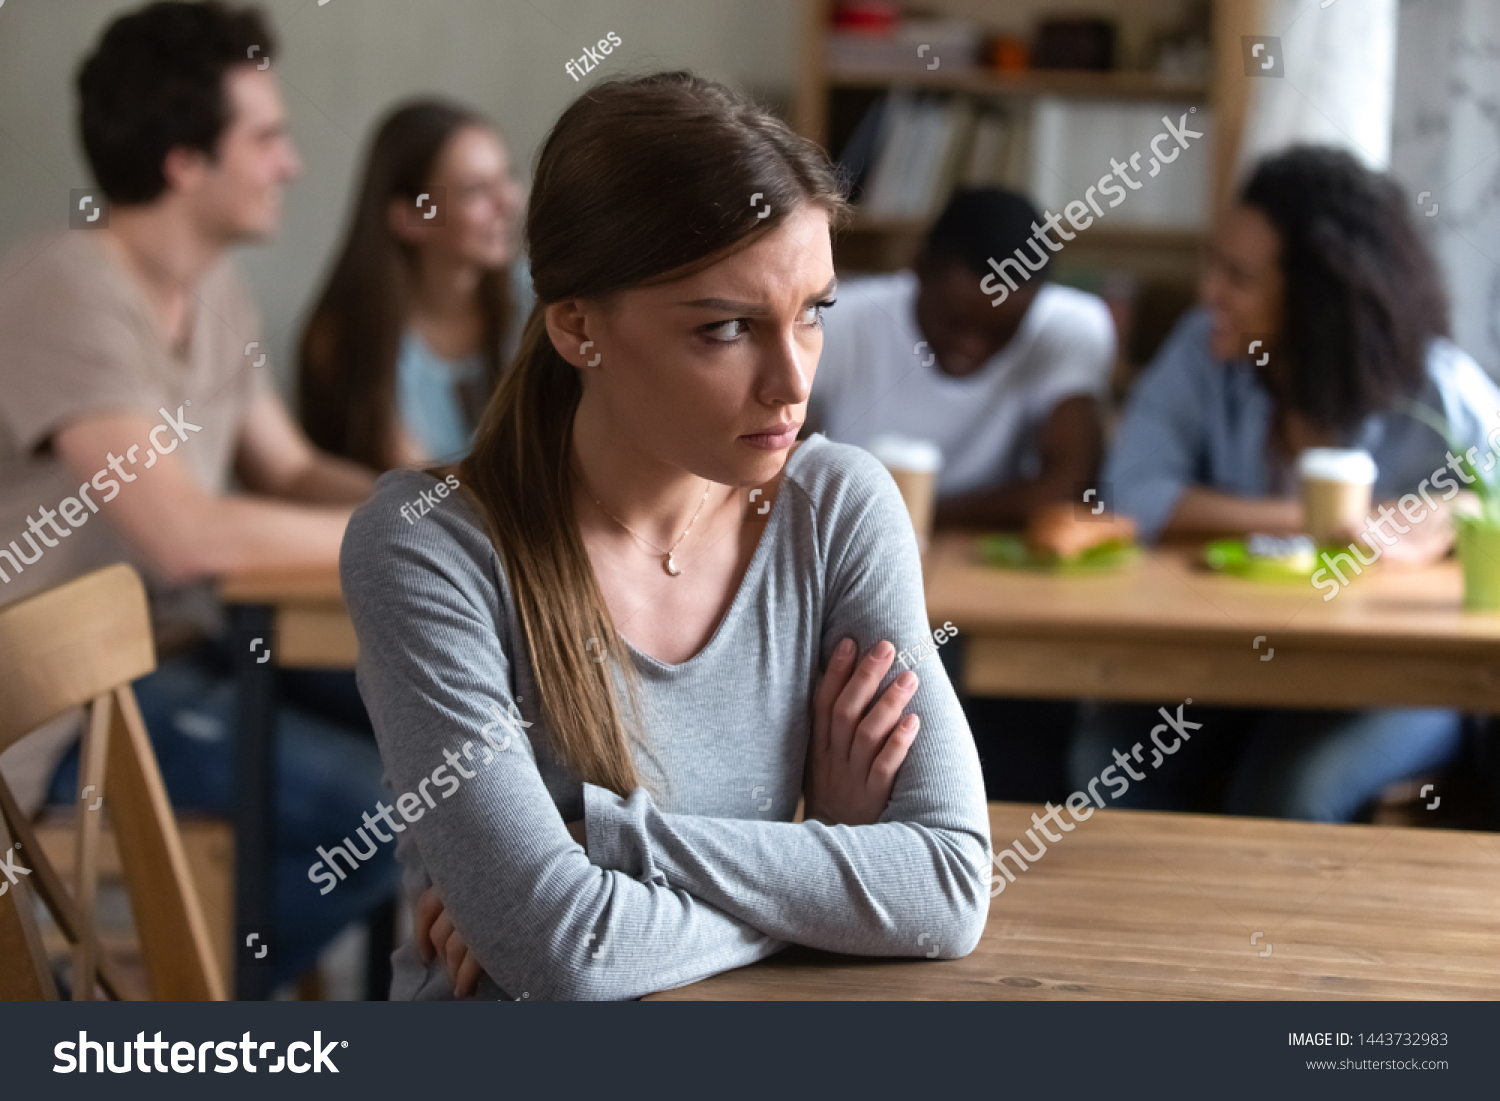 Abused upset offended by friends young caucasian woman sitting alone separately from group of happy laughing people, sad introvert feeling lonely, suffering from bullying, low self-esteem concept. #1443732983